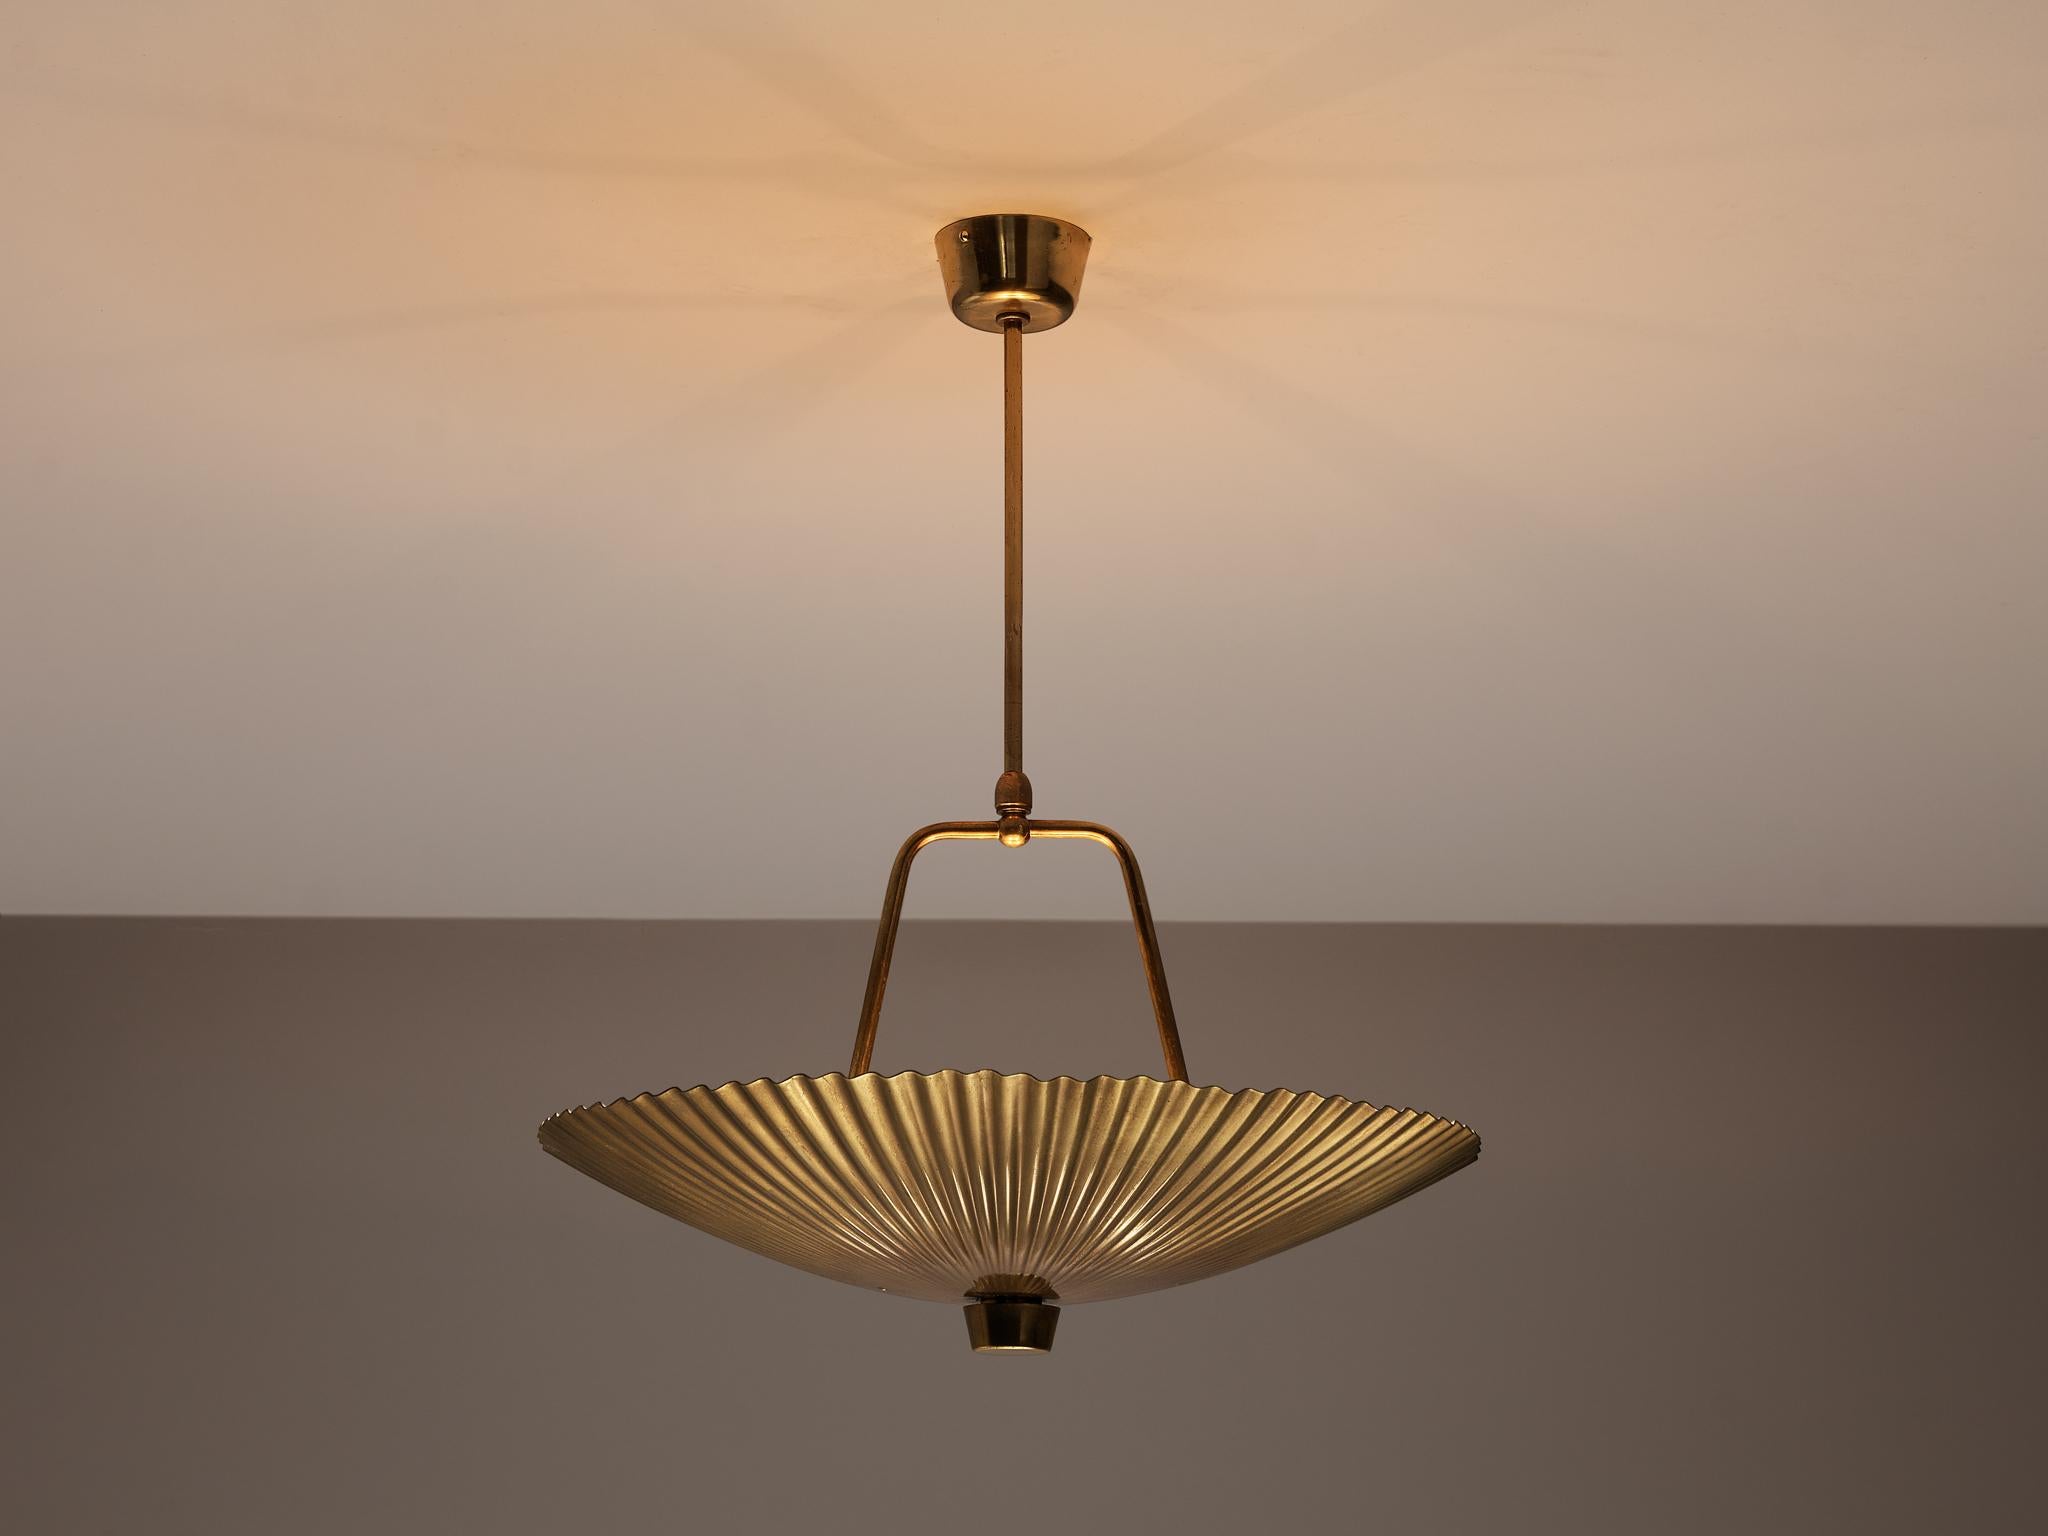 Paavo Tynell for Idman, pendant lamp, brass, Finland, 1960s

Exclusive chandelier by Finnish lamp designer Paavo Tynell for Idman. The wavy texture of the shade was used by Tynell for chandeliers and also for a table lamp. Yet, this way of